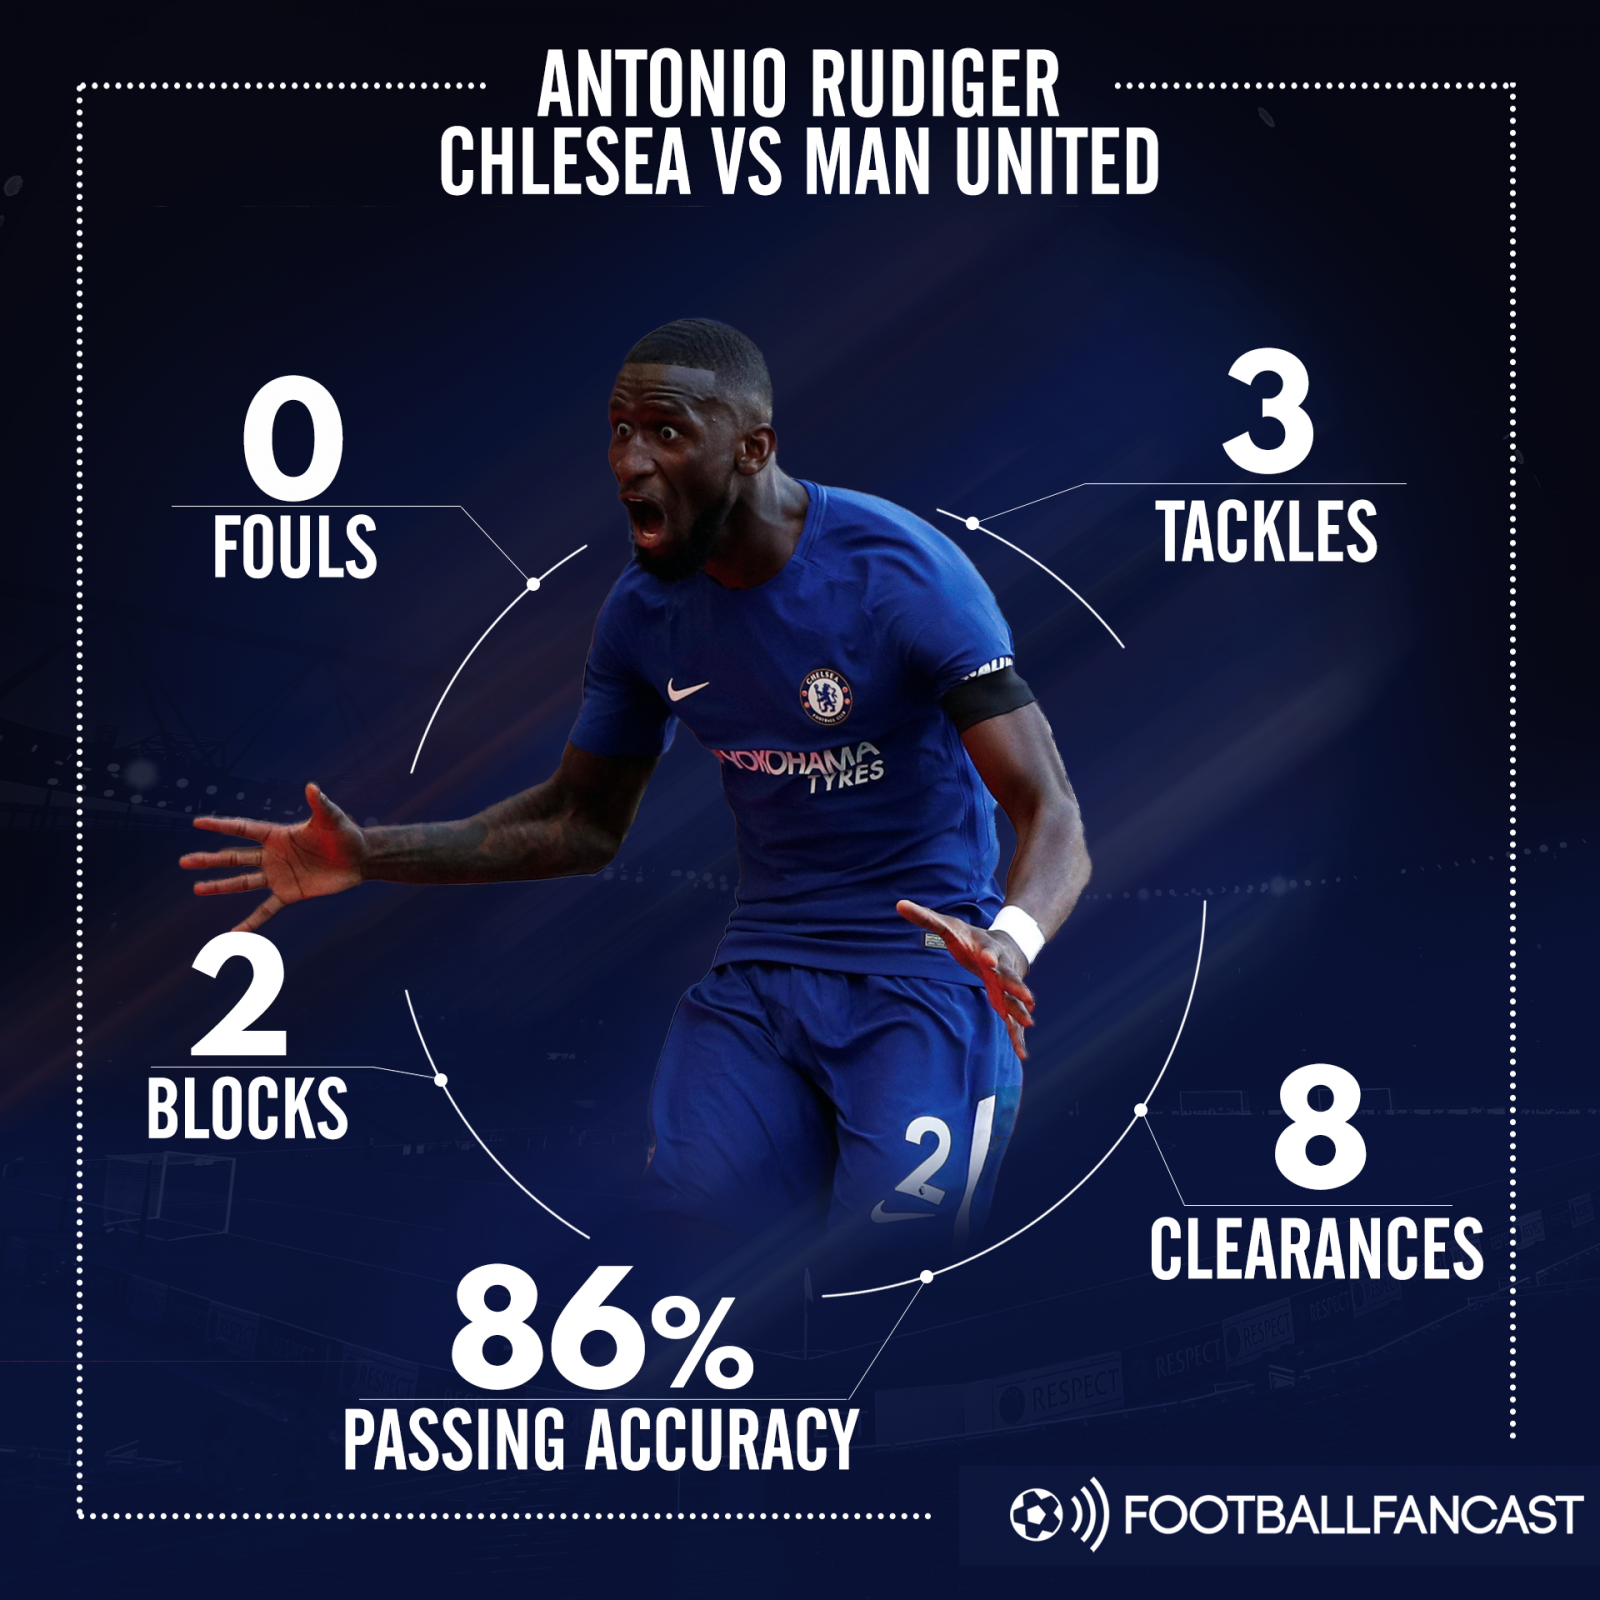 Antonio Rudiger's stats from Chelsea's 1-0 win over Man United